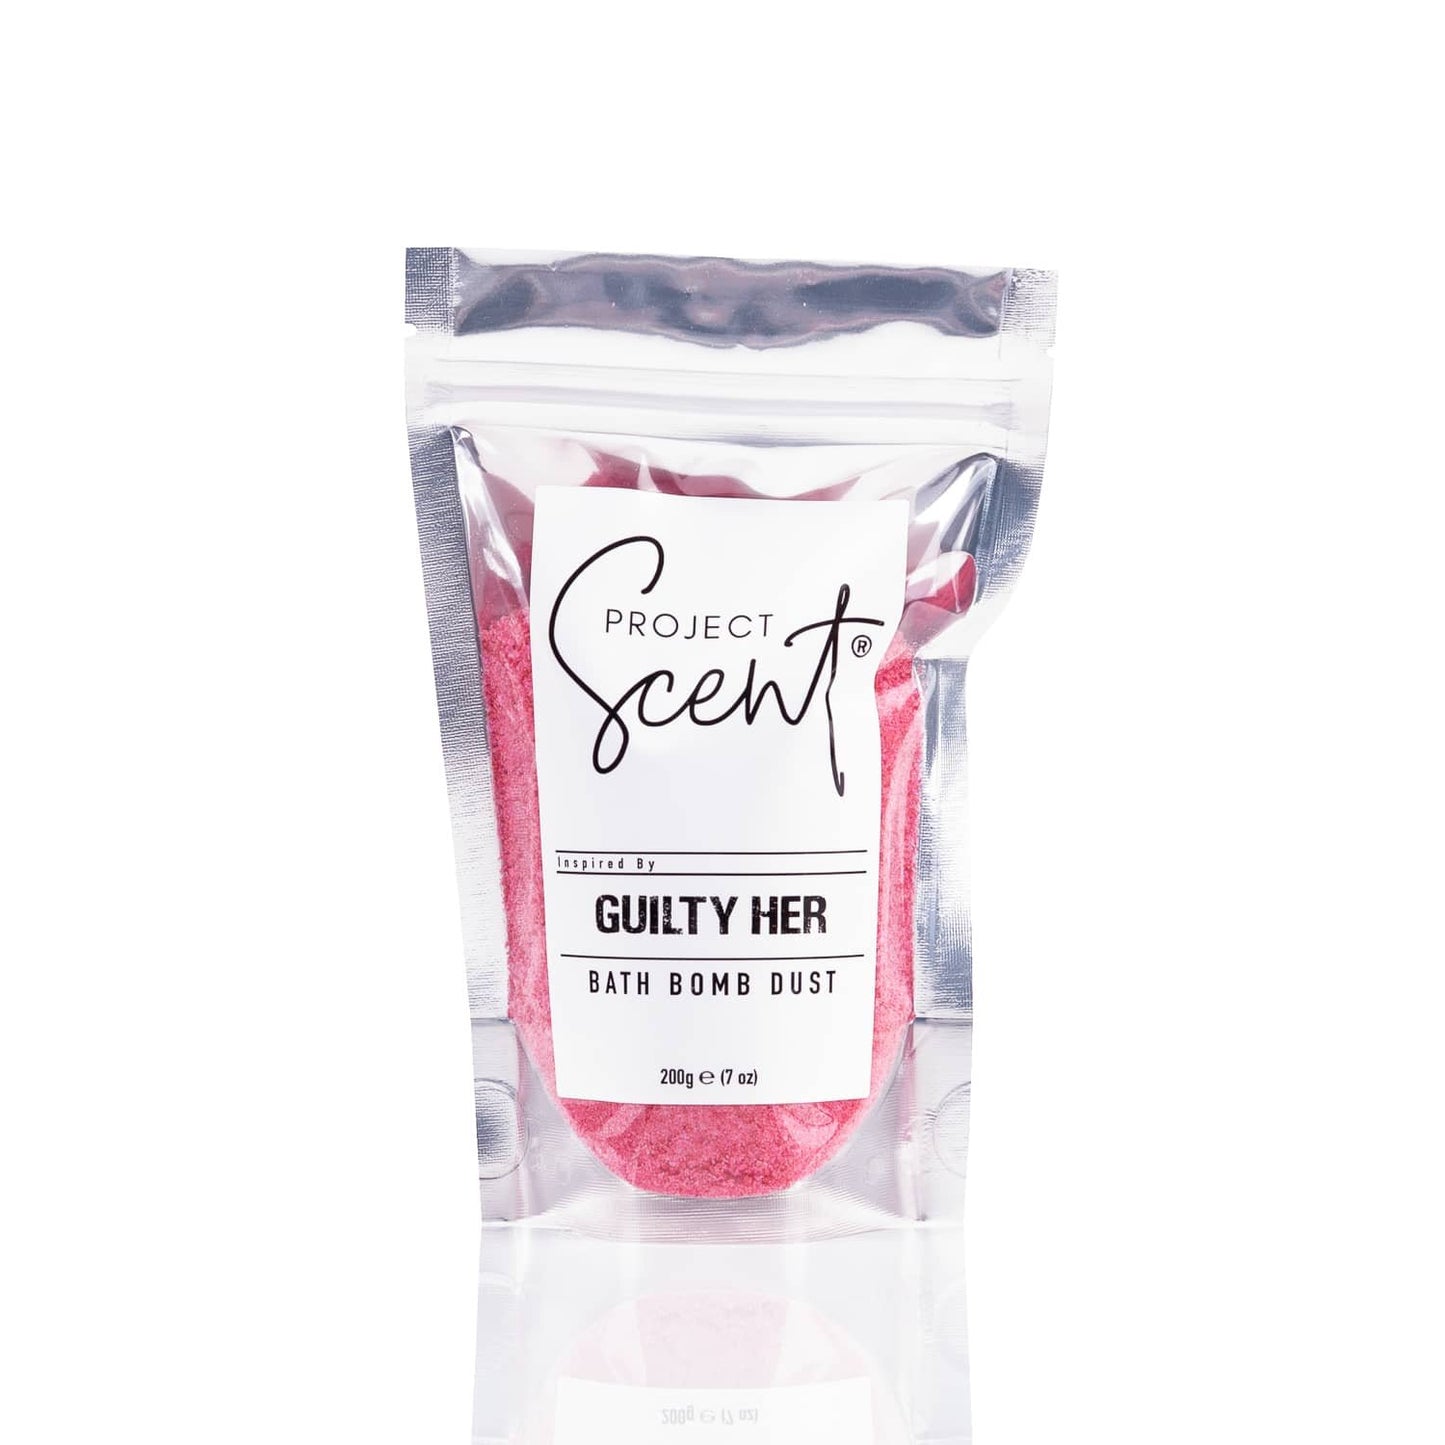 Guilty Her Inspired Bath Bomb Dust 200g